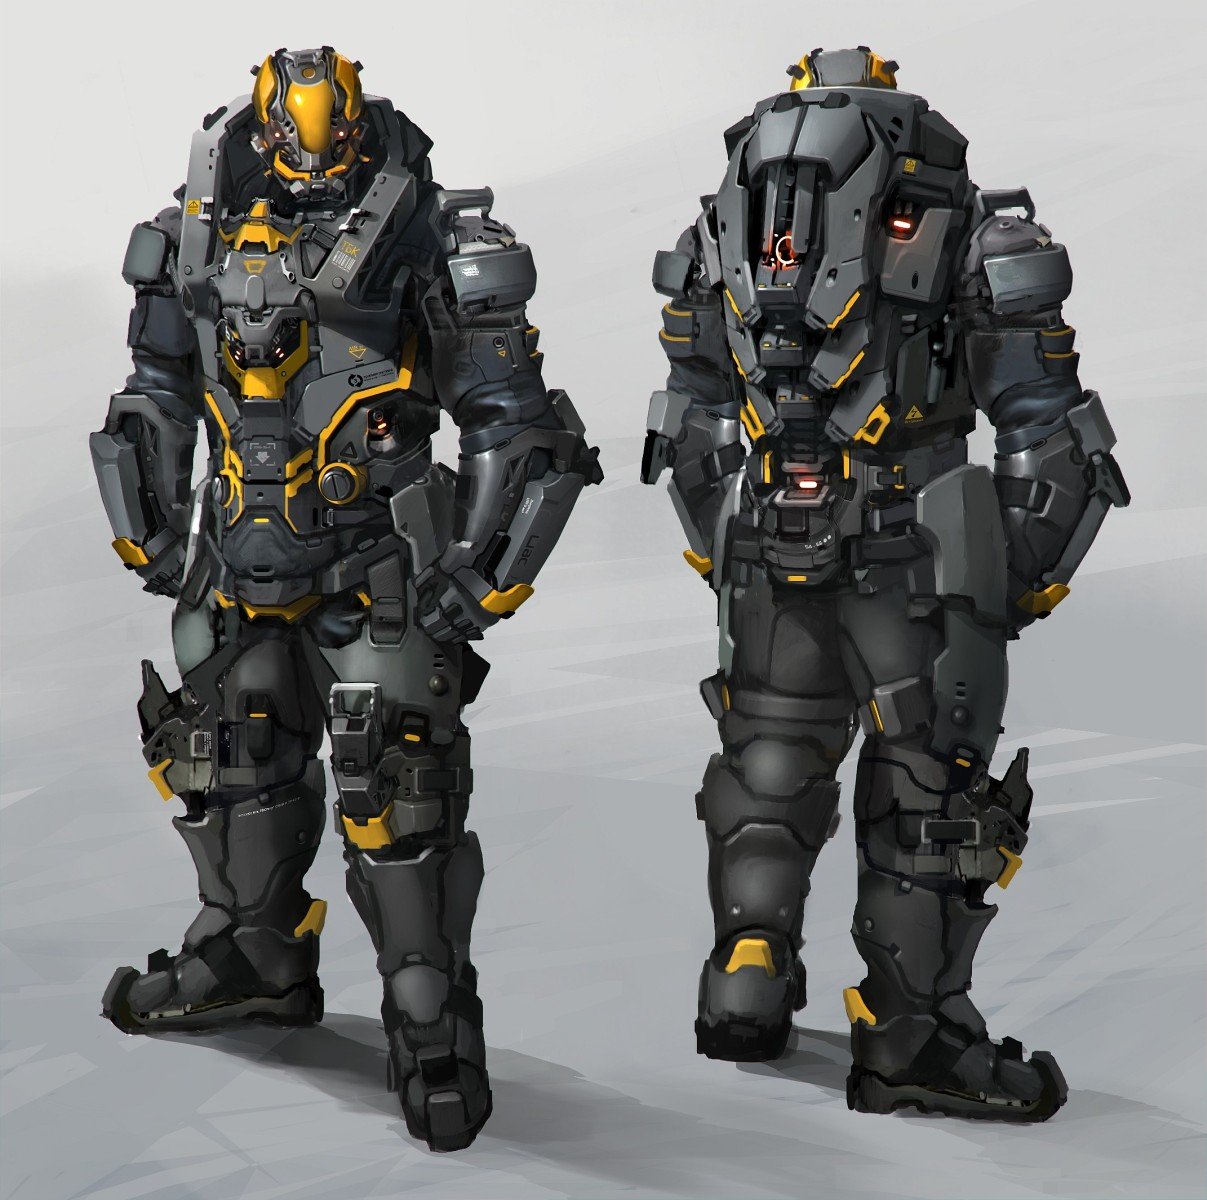 Futuristic Stealth Suit Design by Tysho